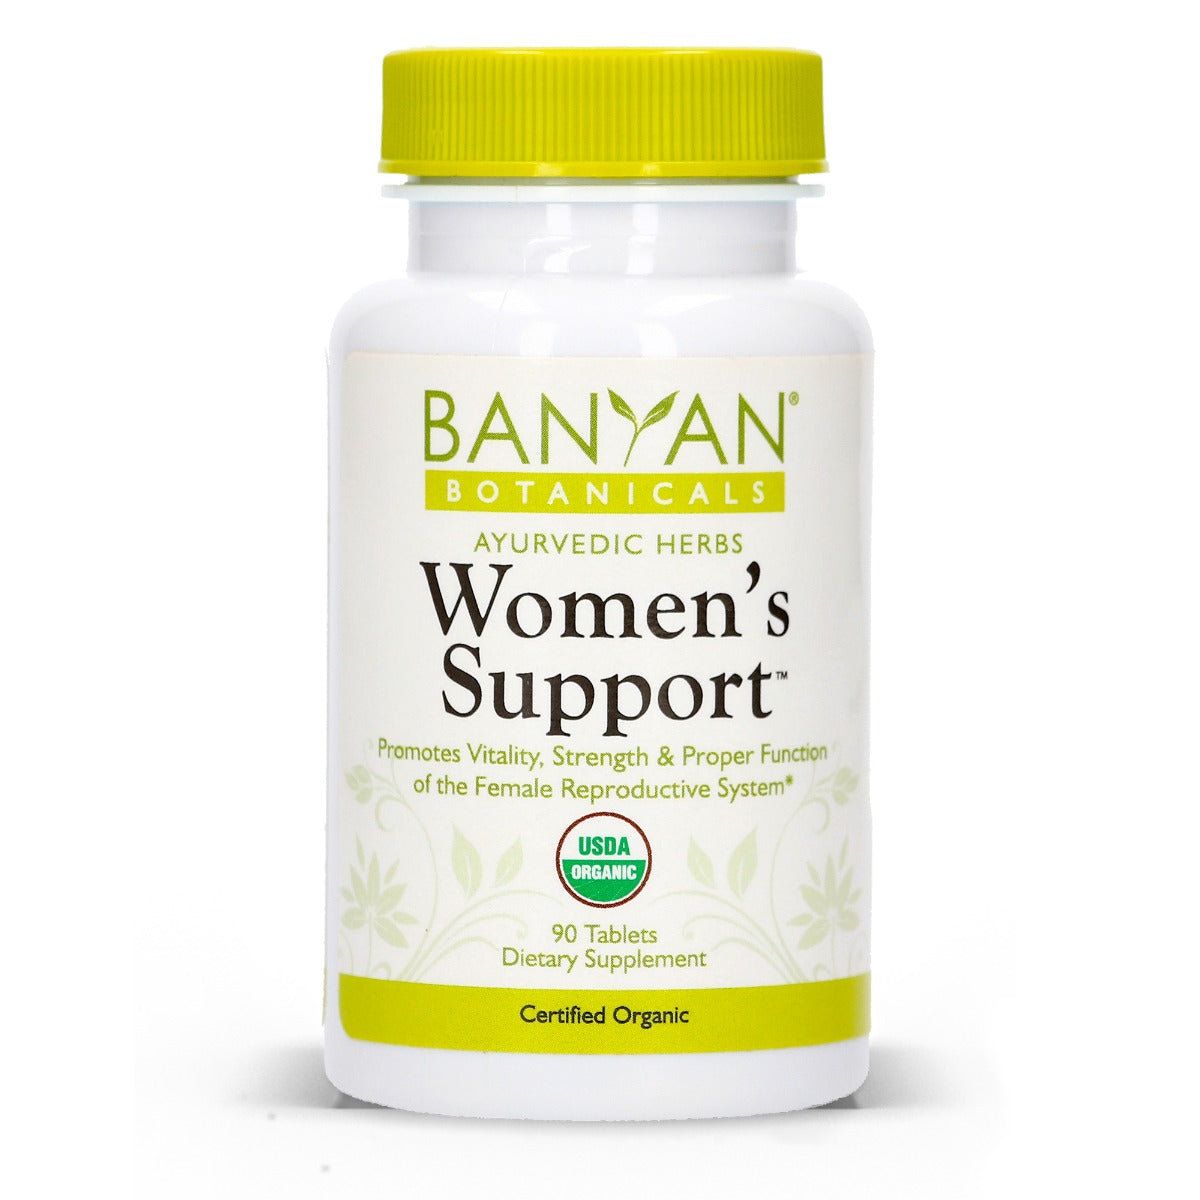 Women's Support™ tablets